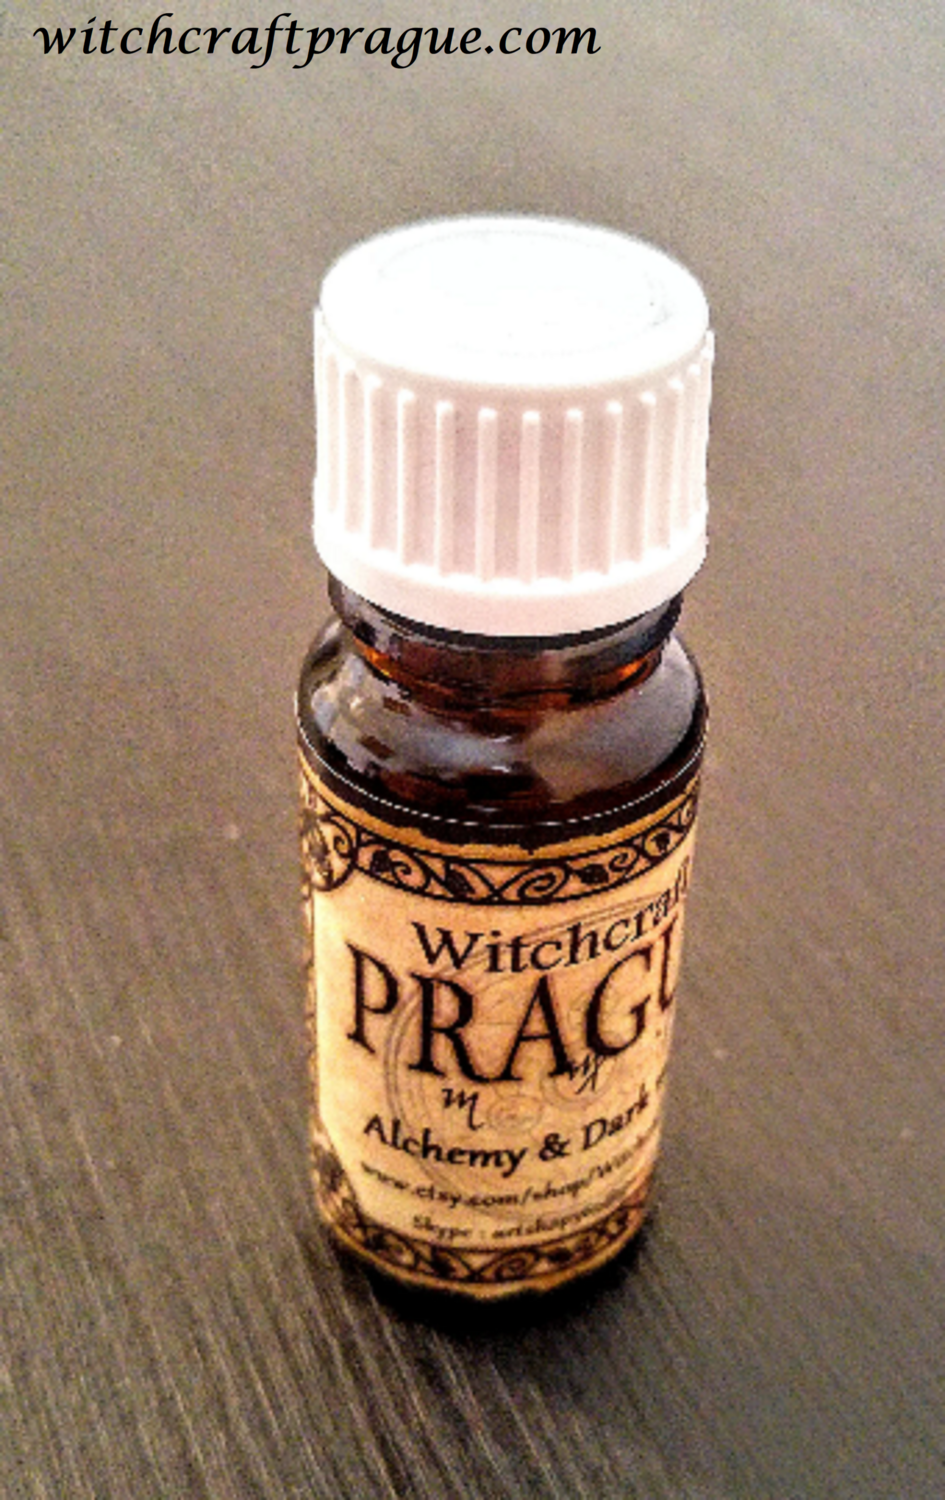 Witches oil success and fortune Talisman Wiccan alter Pagan Spell